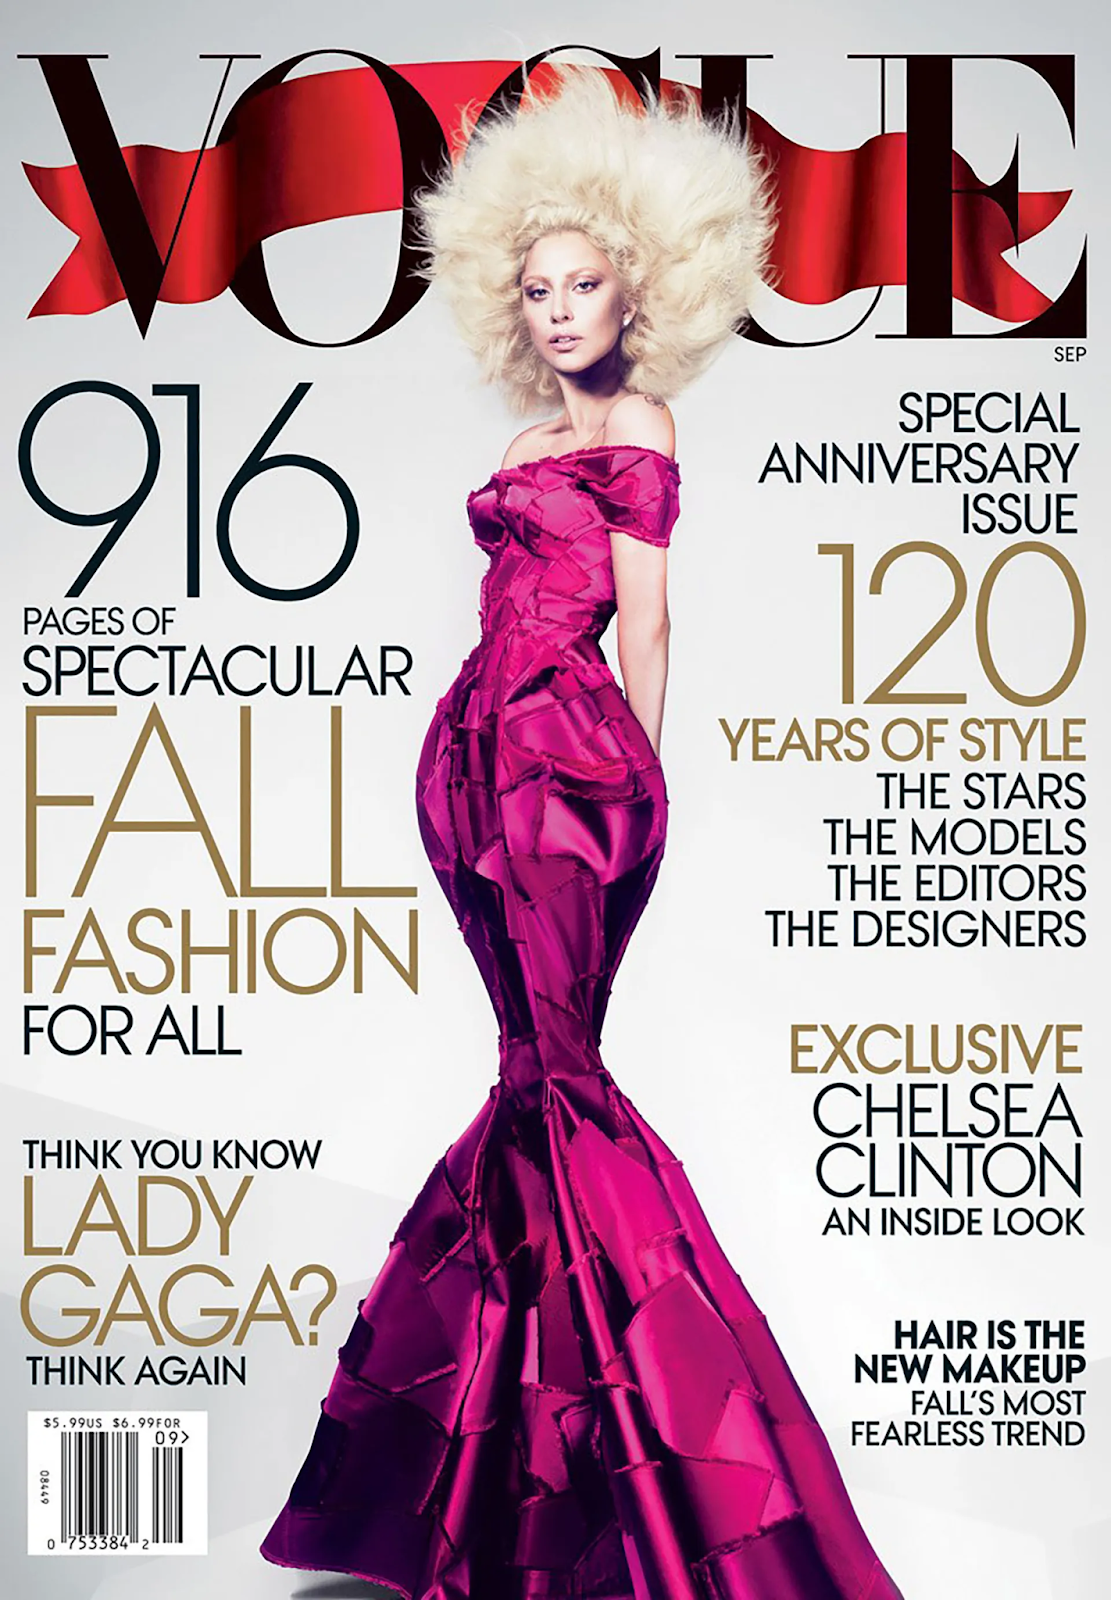 The Biggest Vogue Issue Ever 